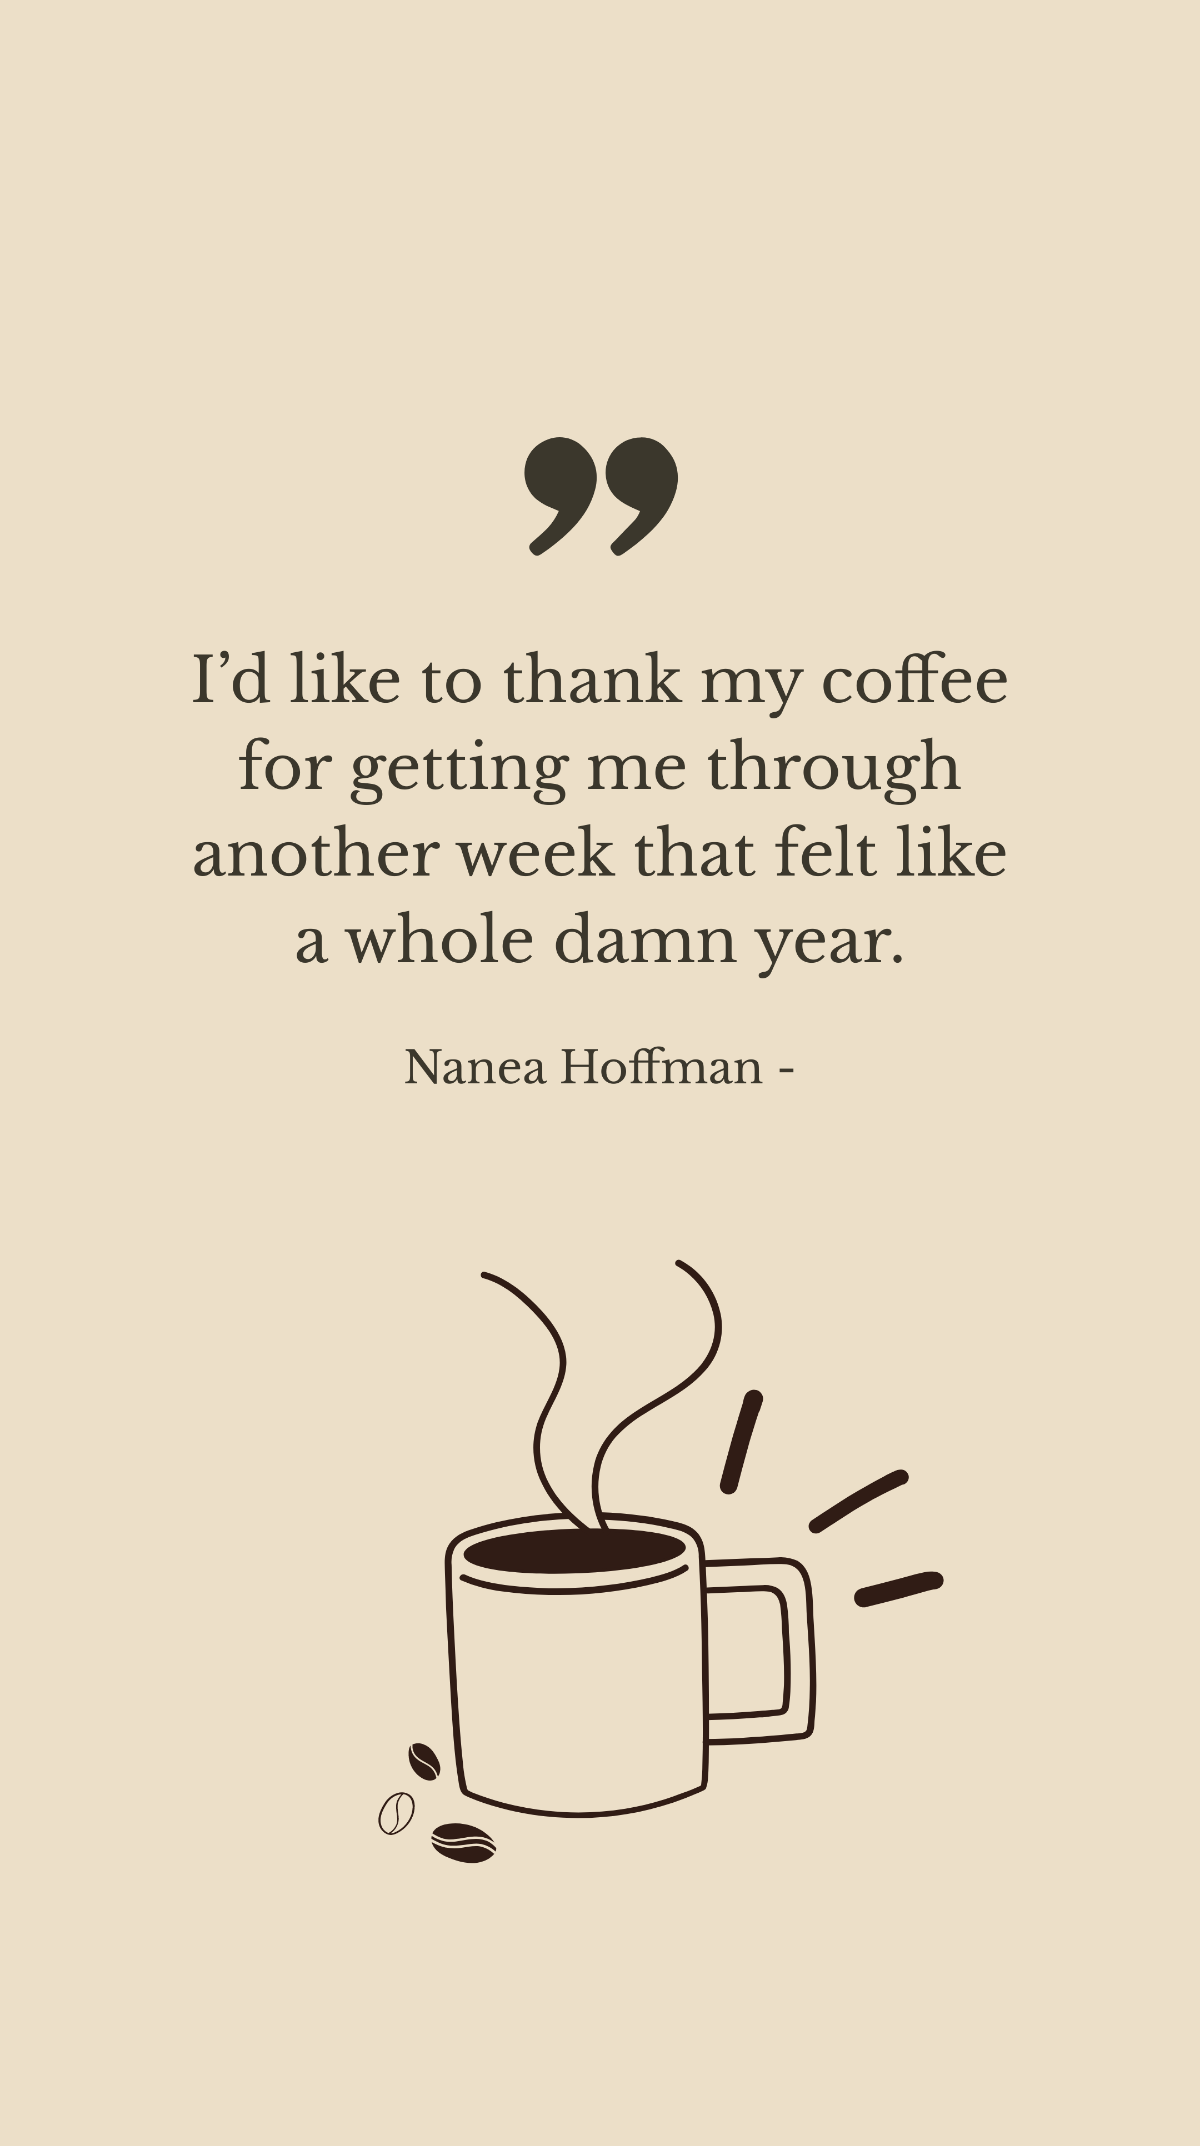 Nanea Hoffman - I’d like to thank my coffee for getting me through another week that felt like a whole damn year. Template